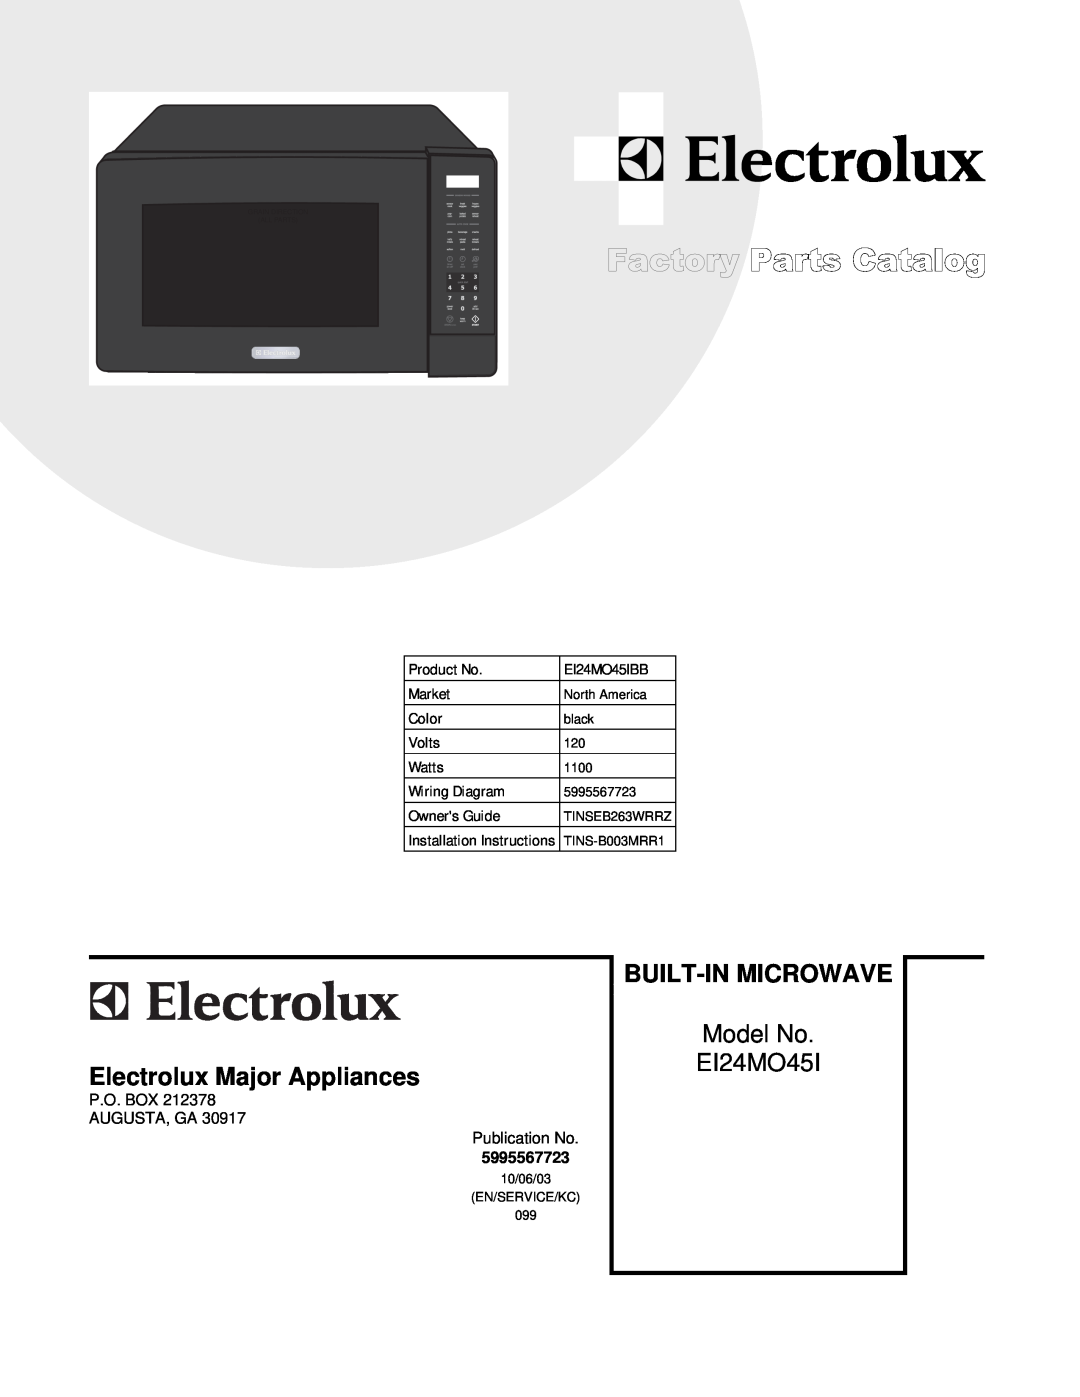 Electrolux EI24MO45IBB installation instructions Built-In Microwave, Electrolux Major Appliances, Model No 